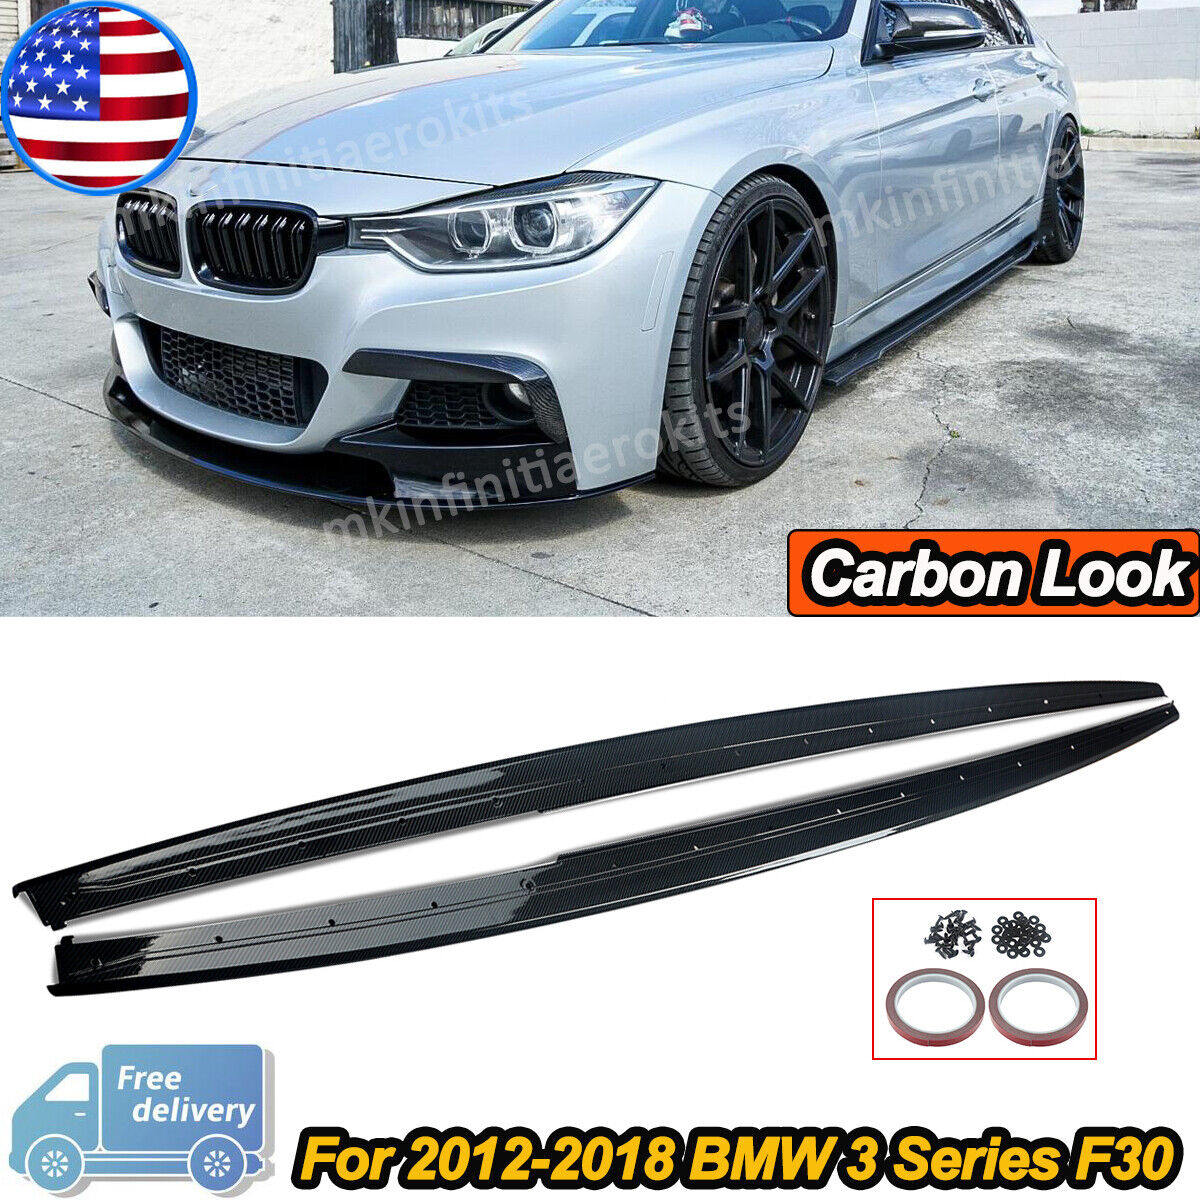 Carbon Fiber Look Side Skirts Extension For BMW F30 F31 3 Series M-Sport 2012-18